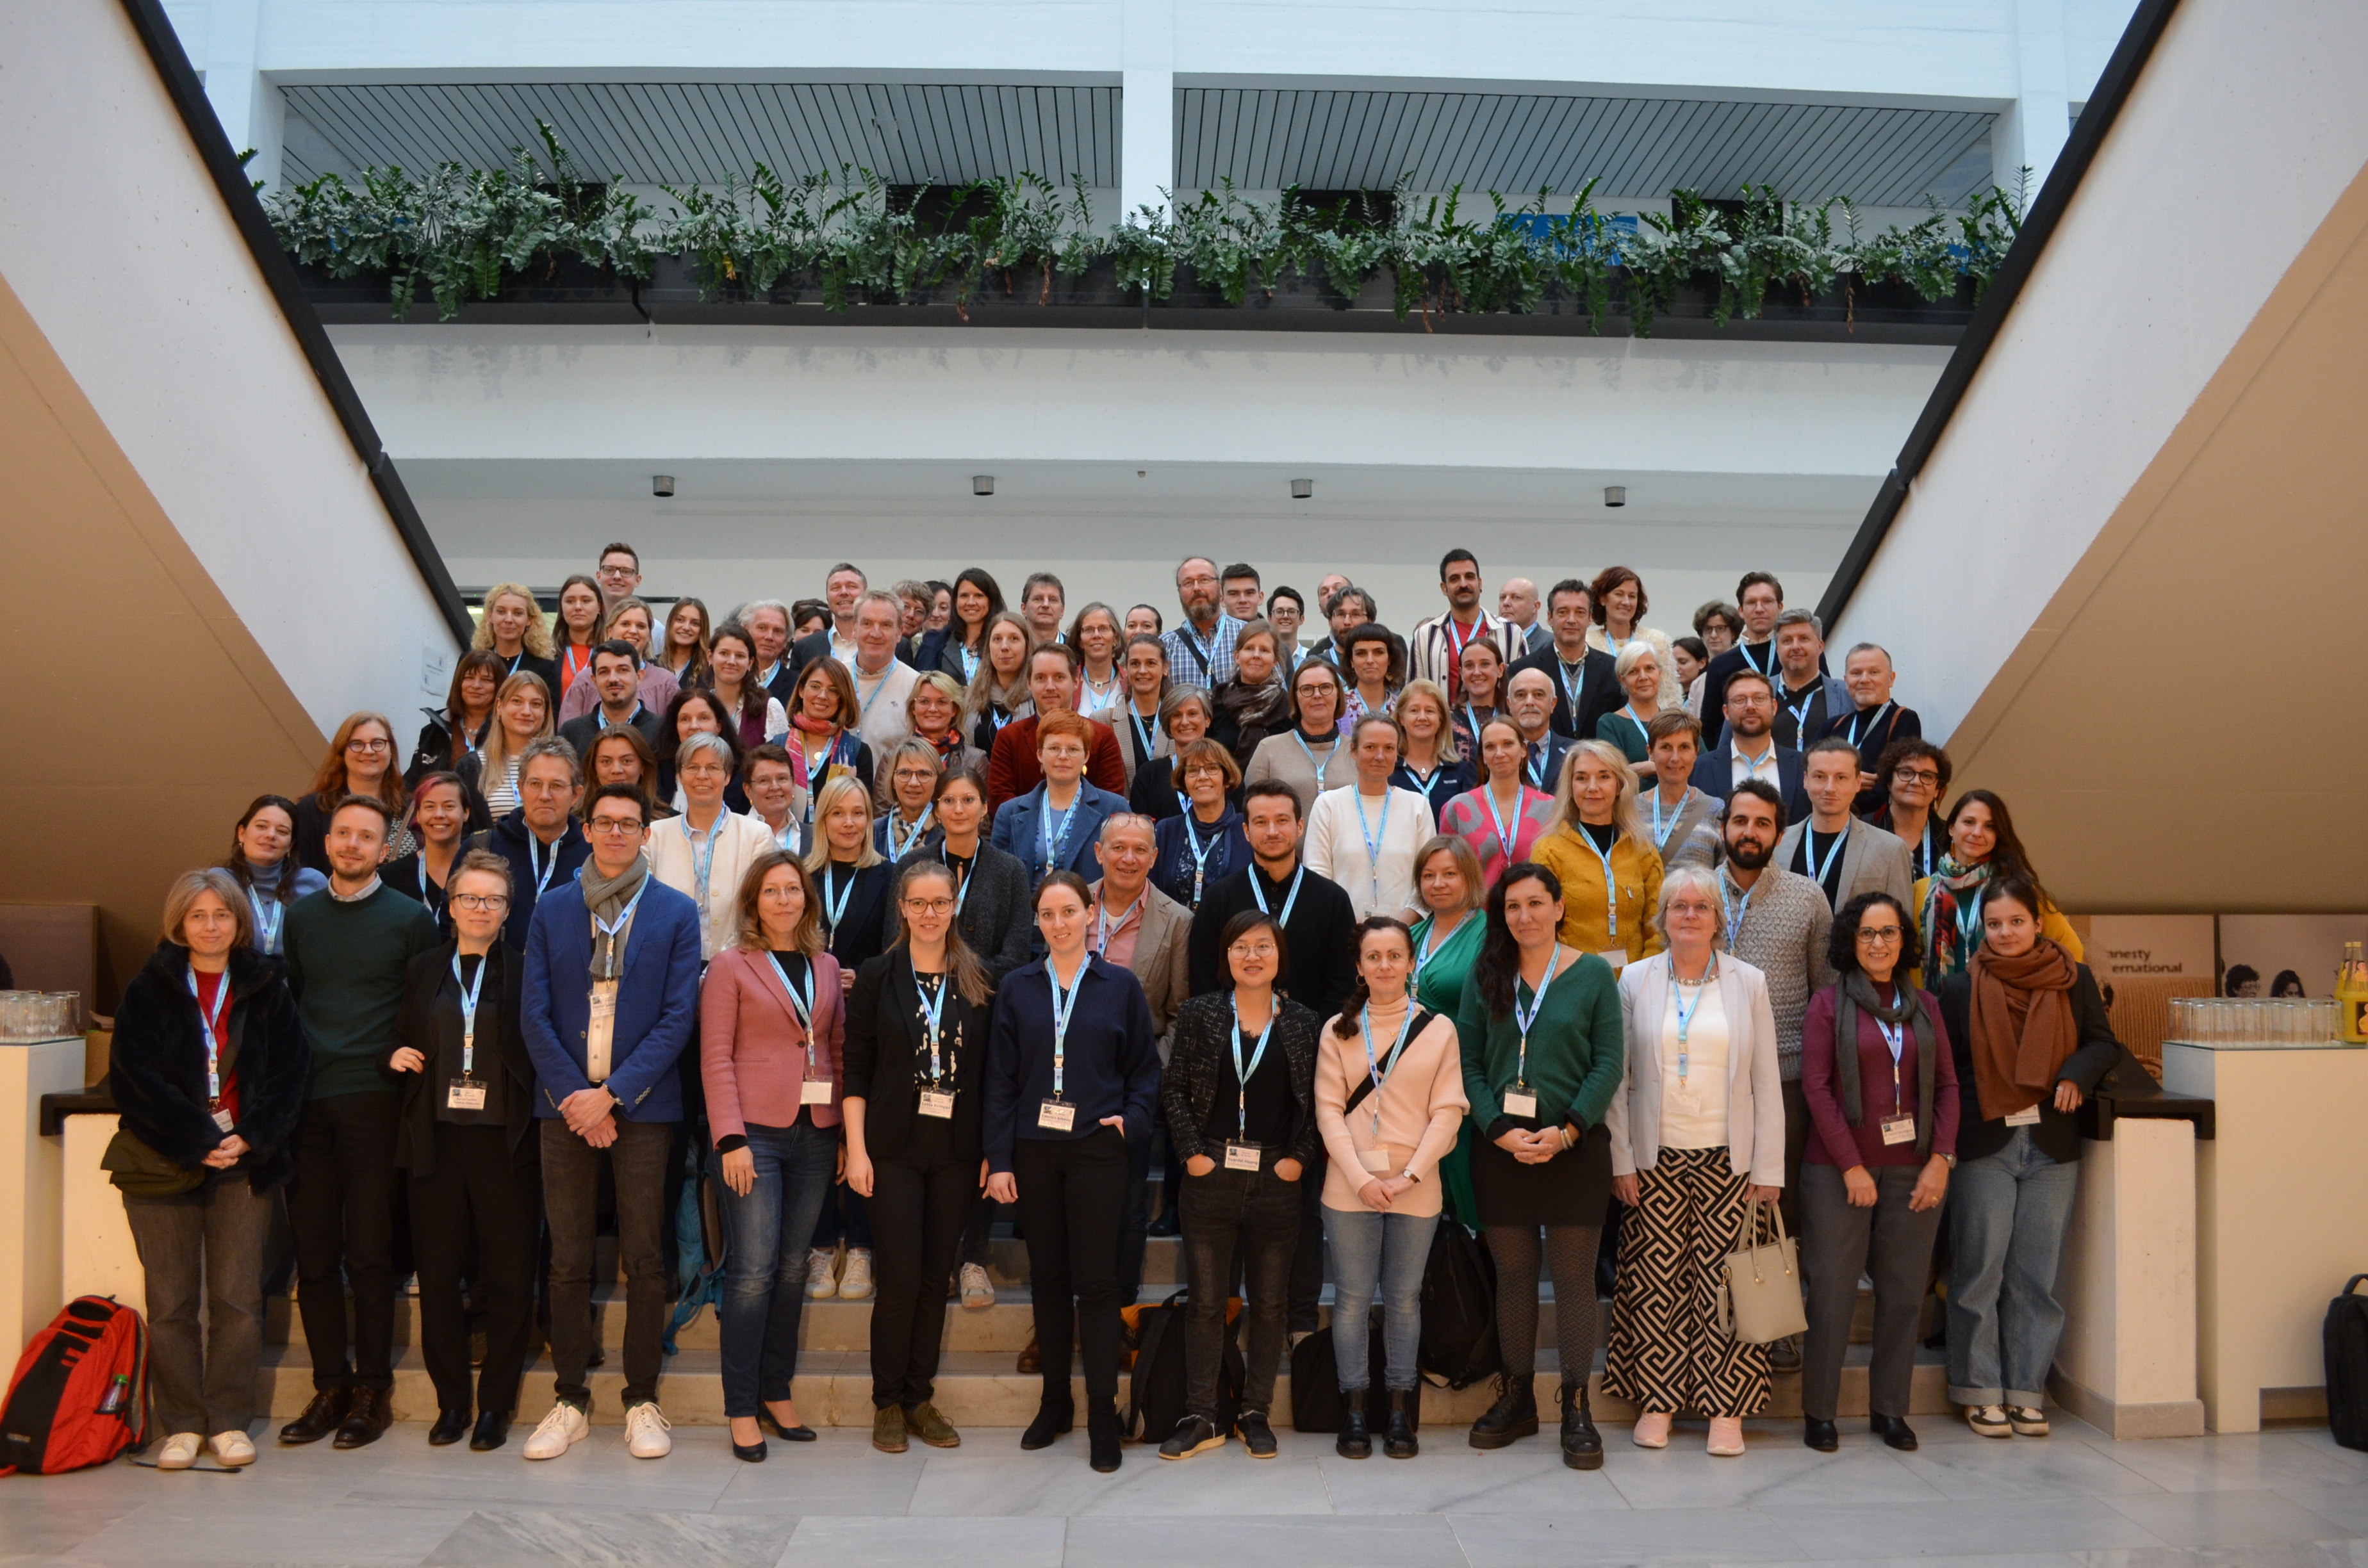 General picture of all the participants of the conference in the stairs of the venue